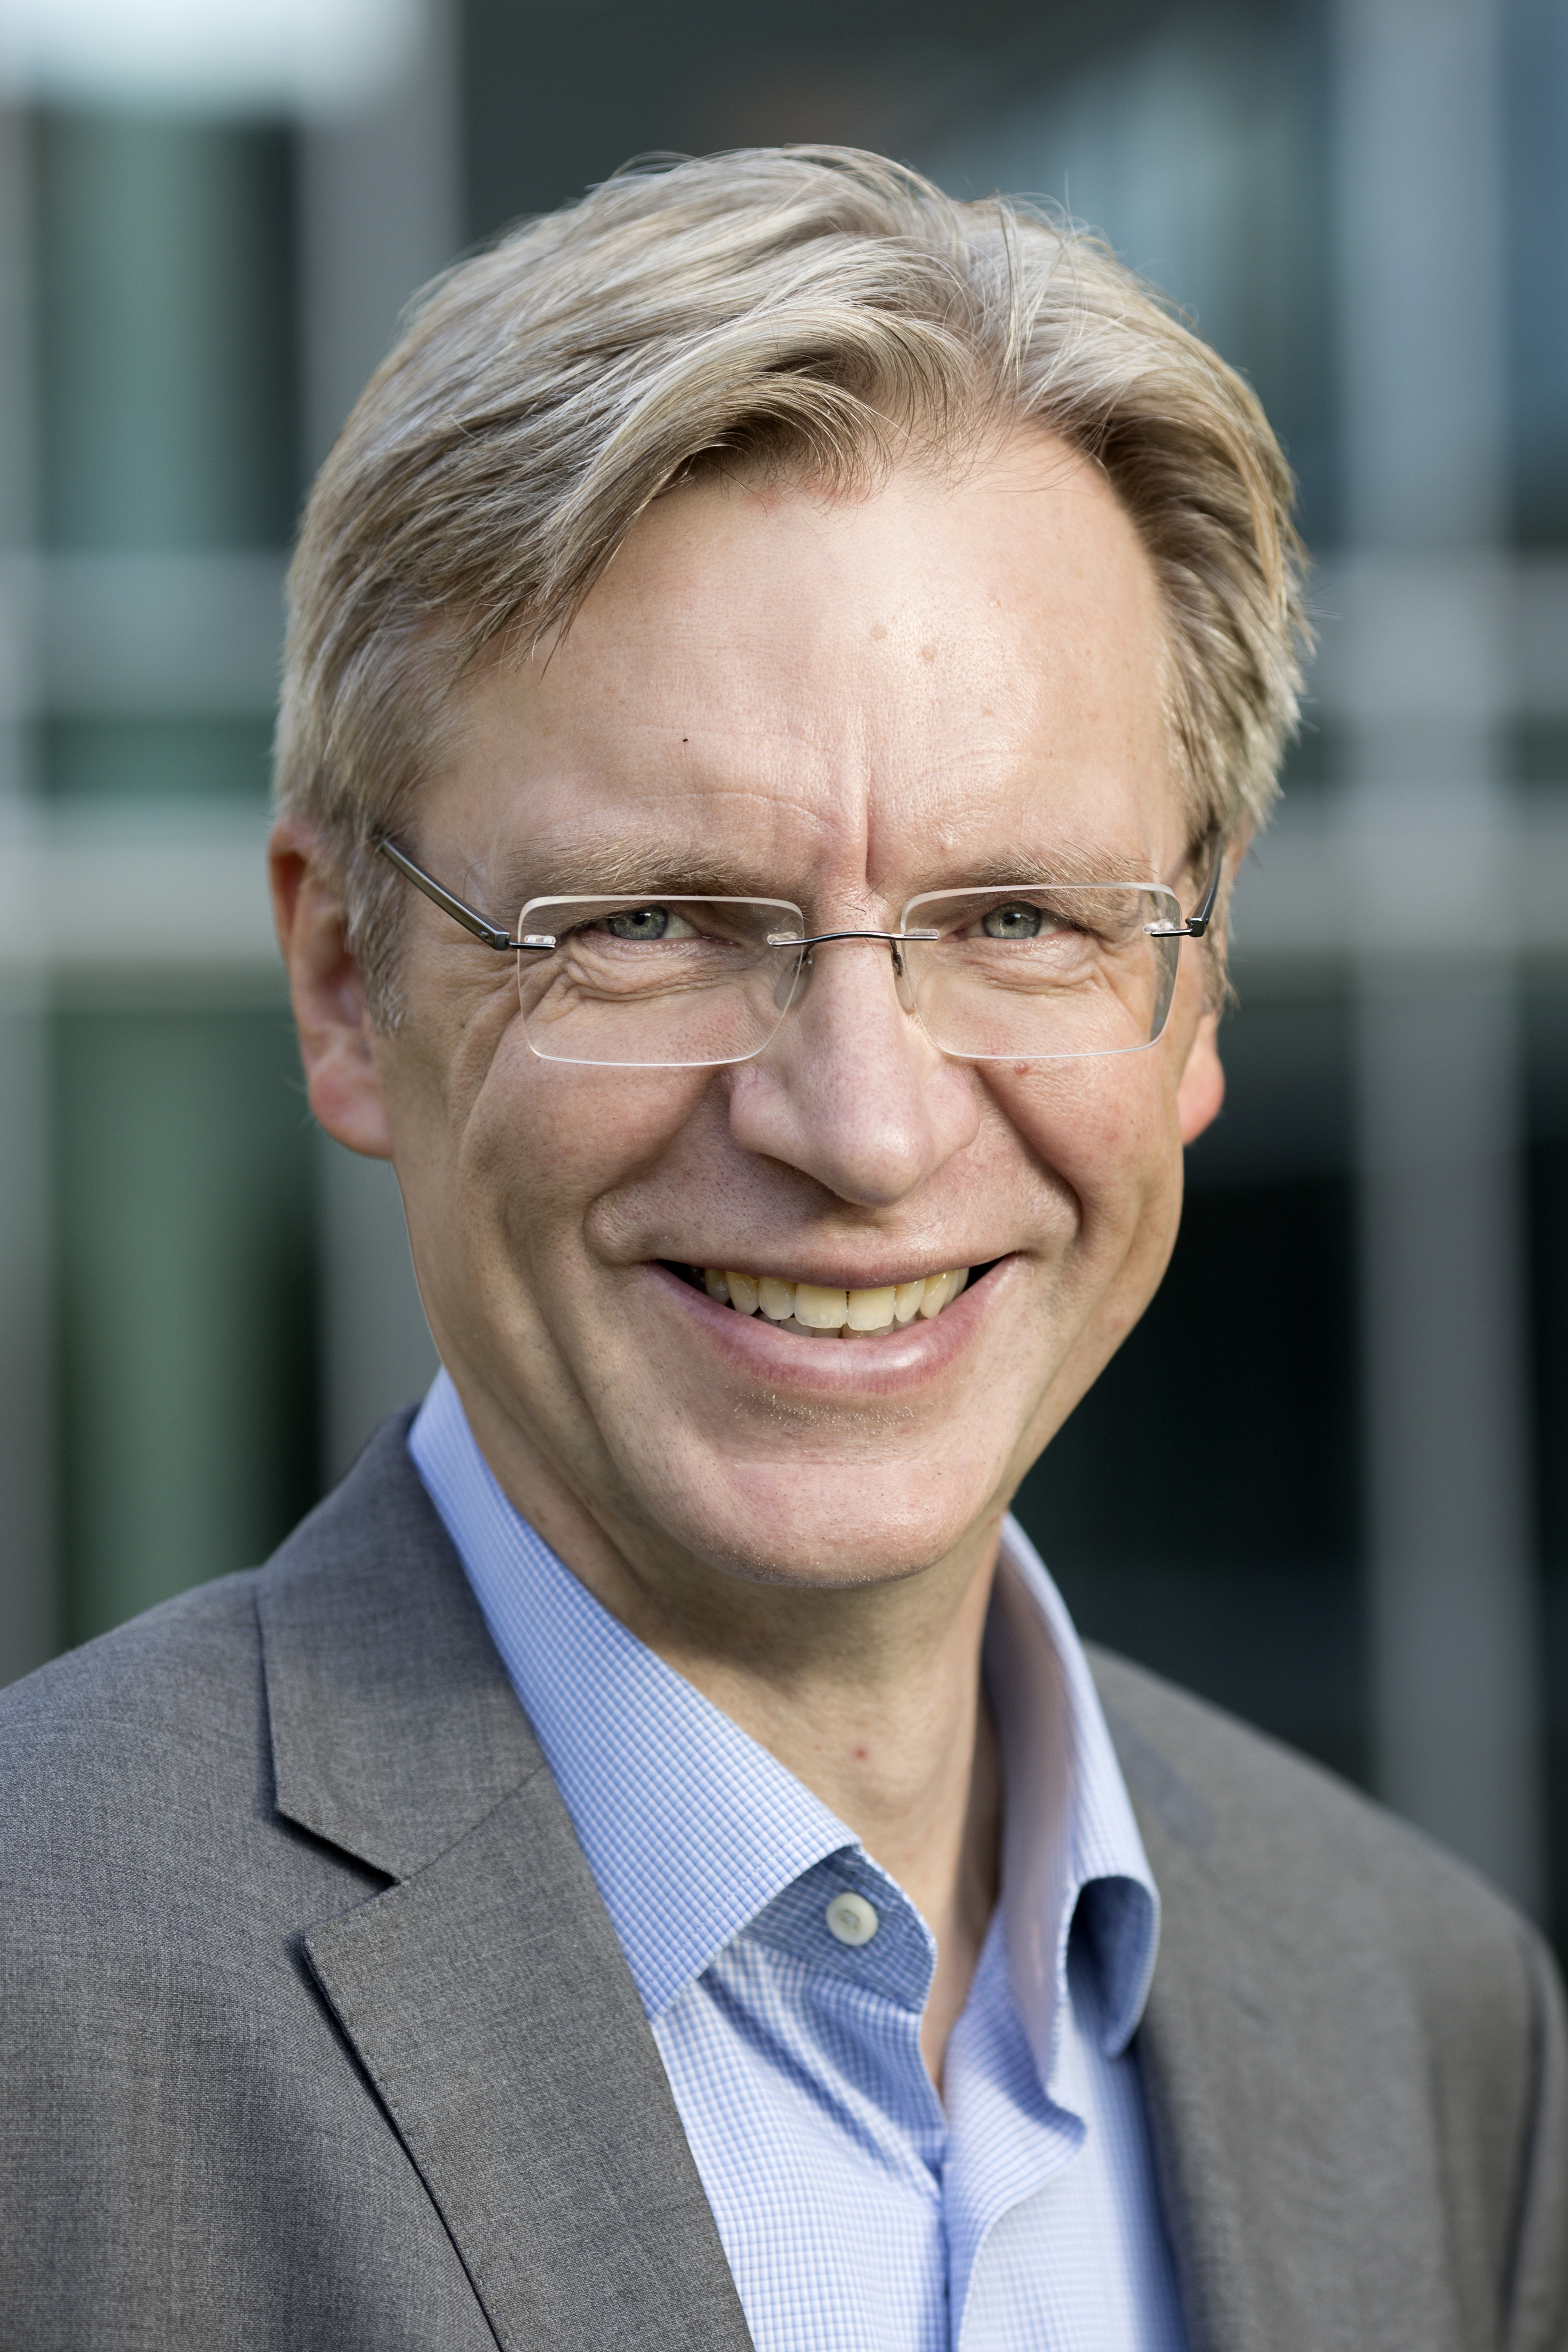 Troels Skrydstrups research into transition metal catalysts as chemical tools of the future is reported on by Aktuel Naturvidenskab. (Photo: Lars Kruse, AU Photo)